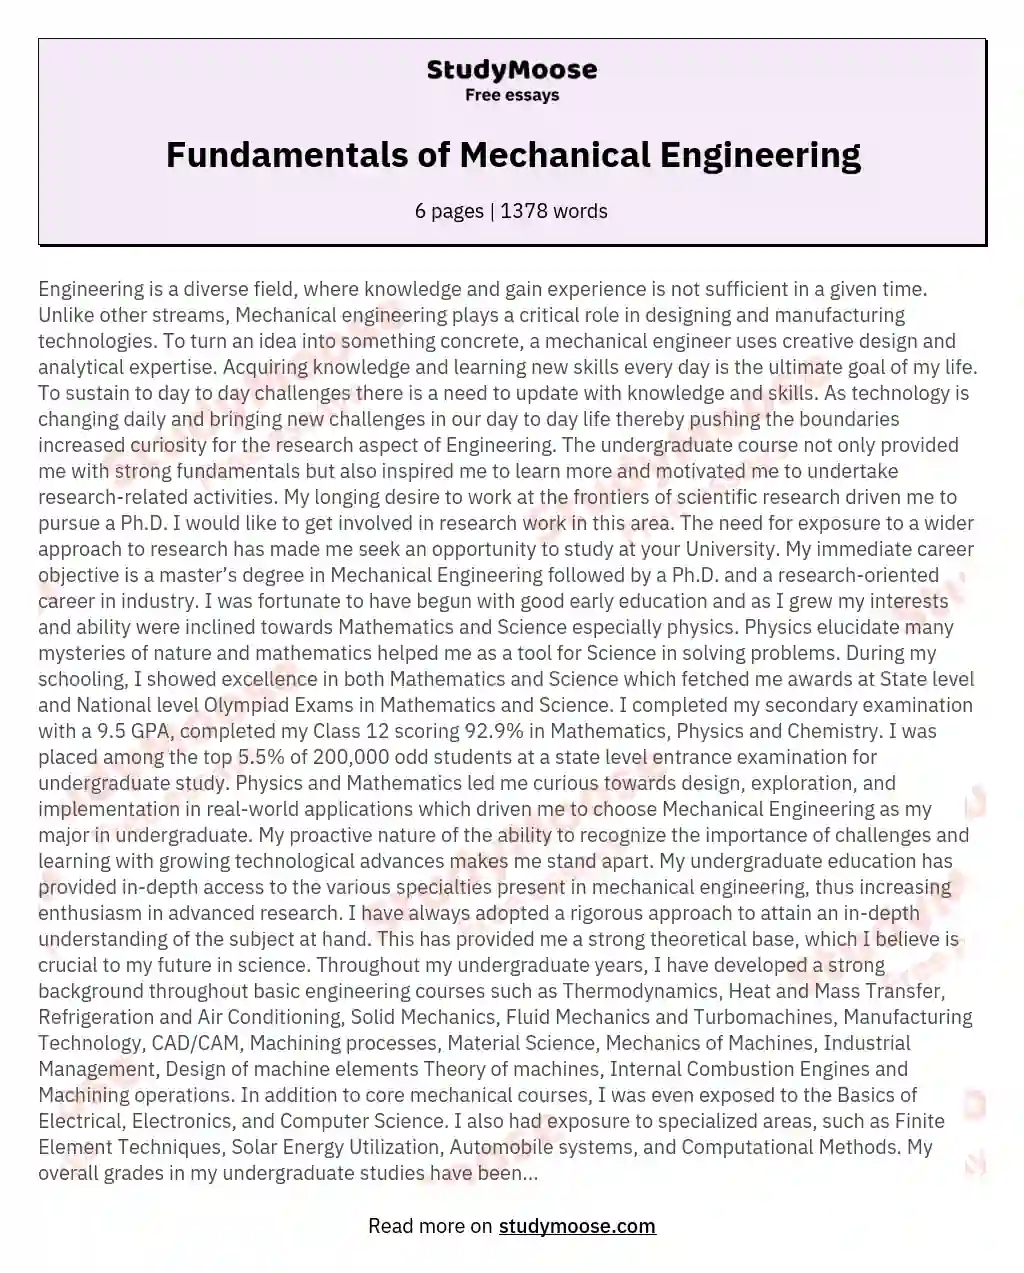 essay for mechanical engineering